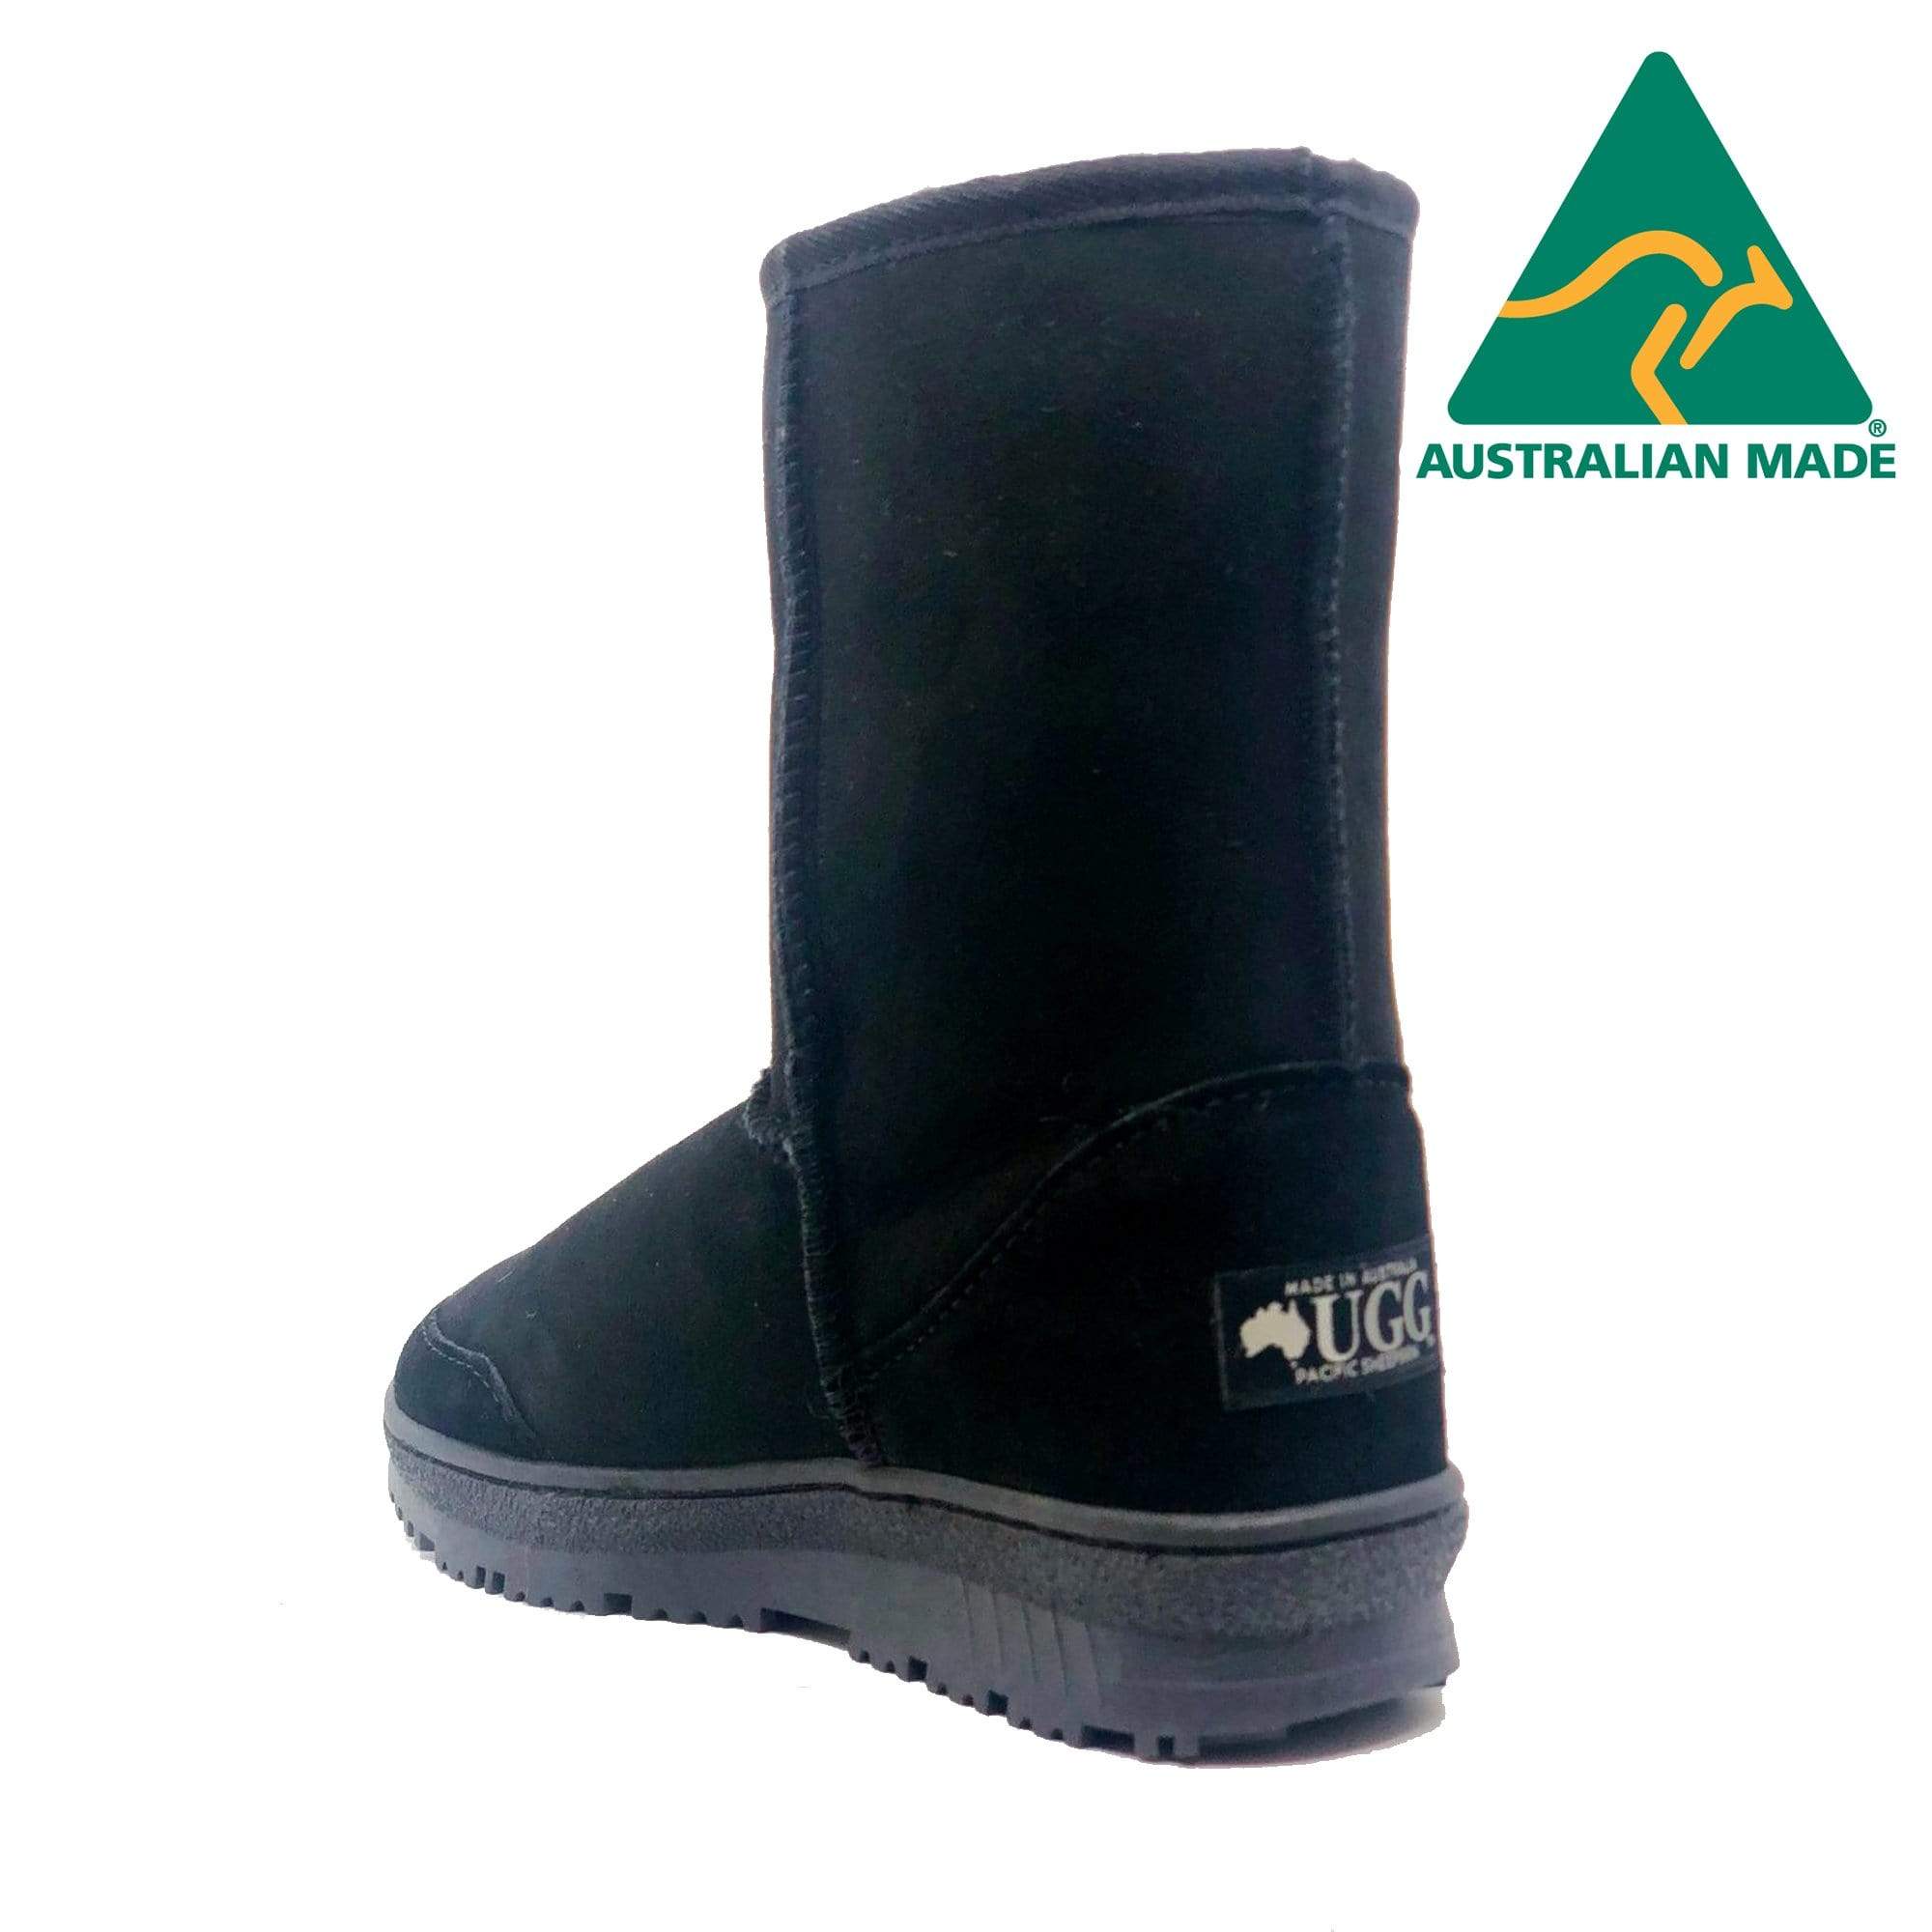 UGG Montana Short Outdoor Sole Boots - Made in Australia